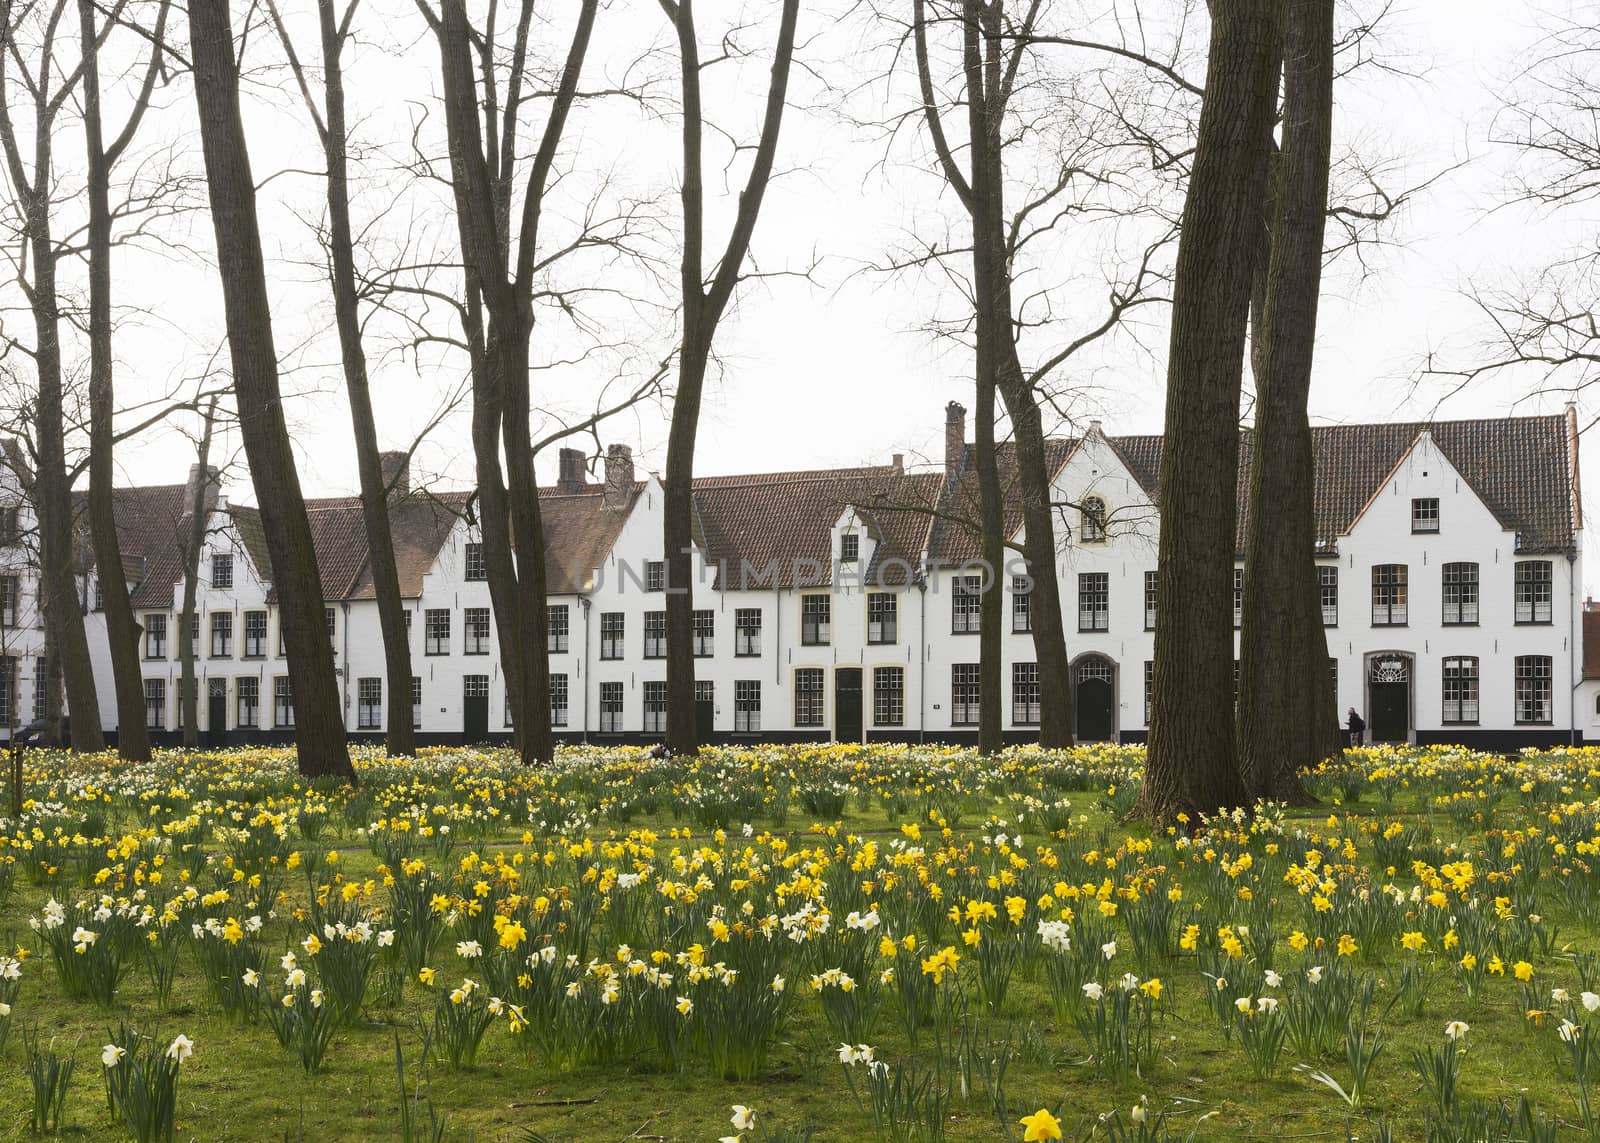 Beguinage of Bruges and daffodils in early spring 2014. by Claudine